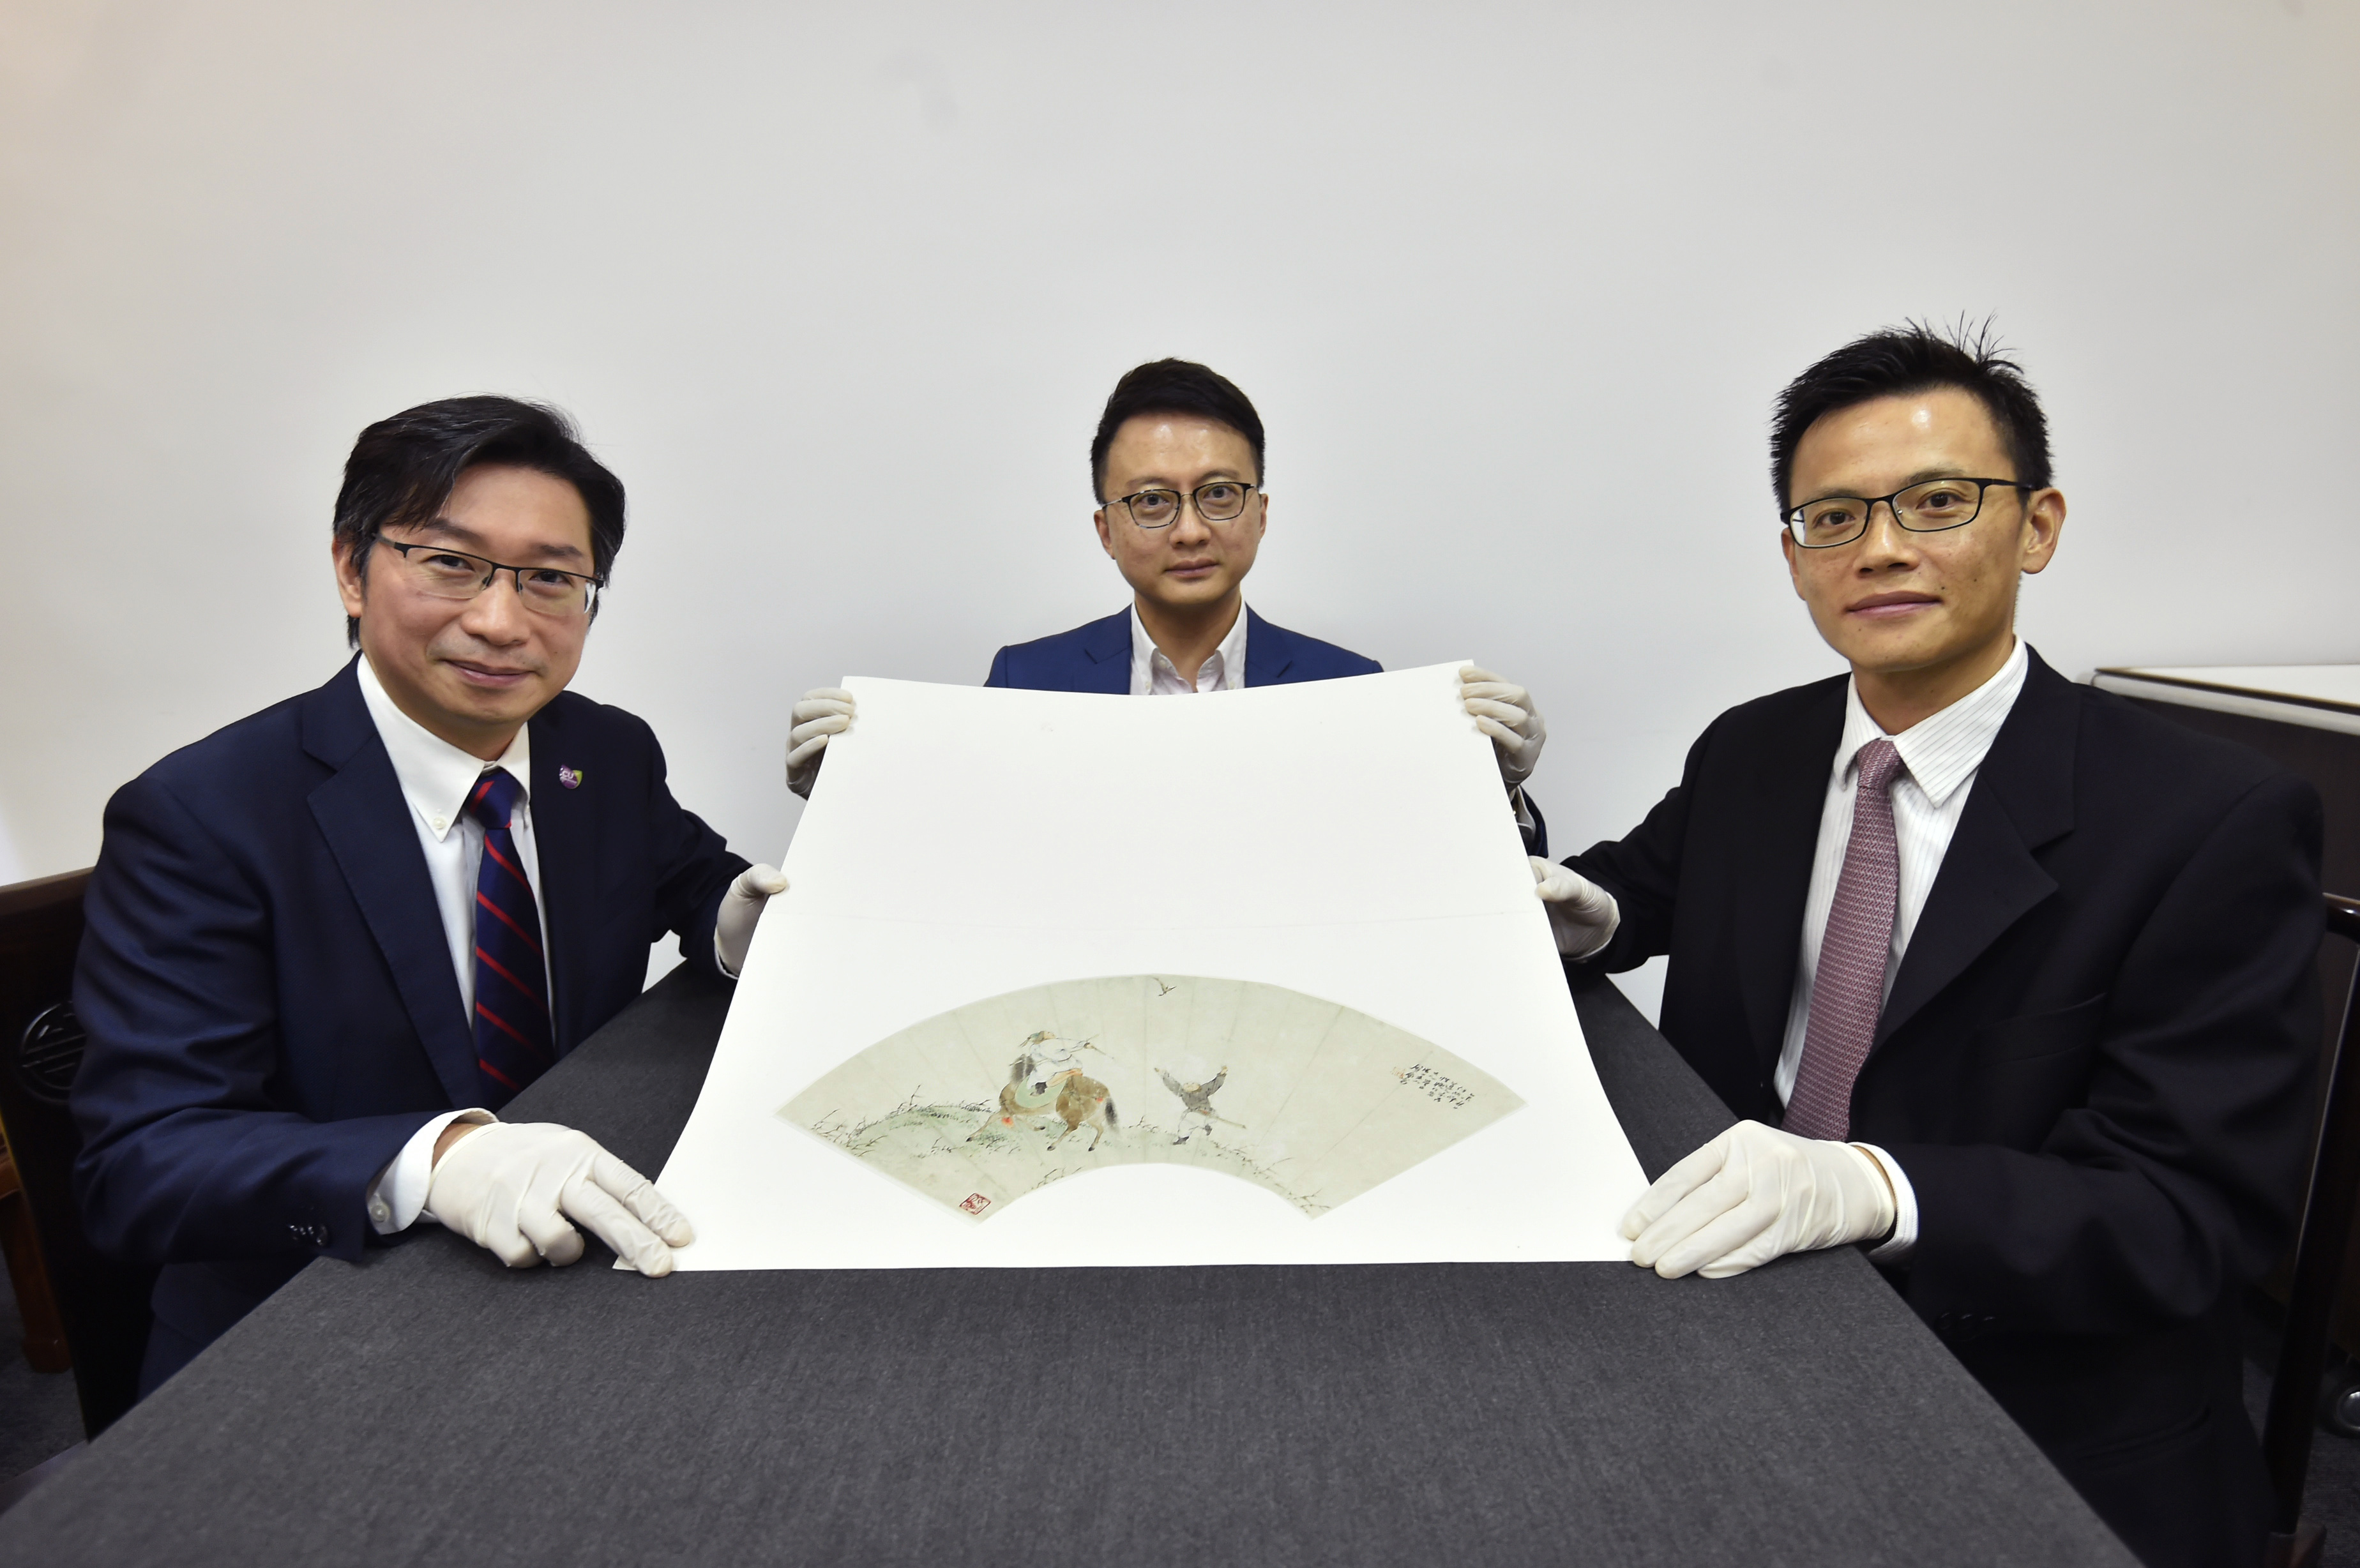 Professor Josh YIU (right), Director of the Art Museum at CUHK, states that the new programme will provide hands-on training for students to look at and handle artworks that are specifically chosen. Medical students will be asked to describe what they see and feel, and to discuss alternative interpretations, thereby understanding both the possibilities and limitations of close observations. The artwork presented in the upper photo is the Fan Painting “Hunting” of Ju Lian, while the one presented in the lower photo is the ritual vessel dou.